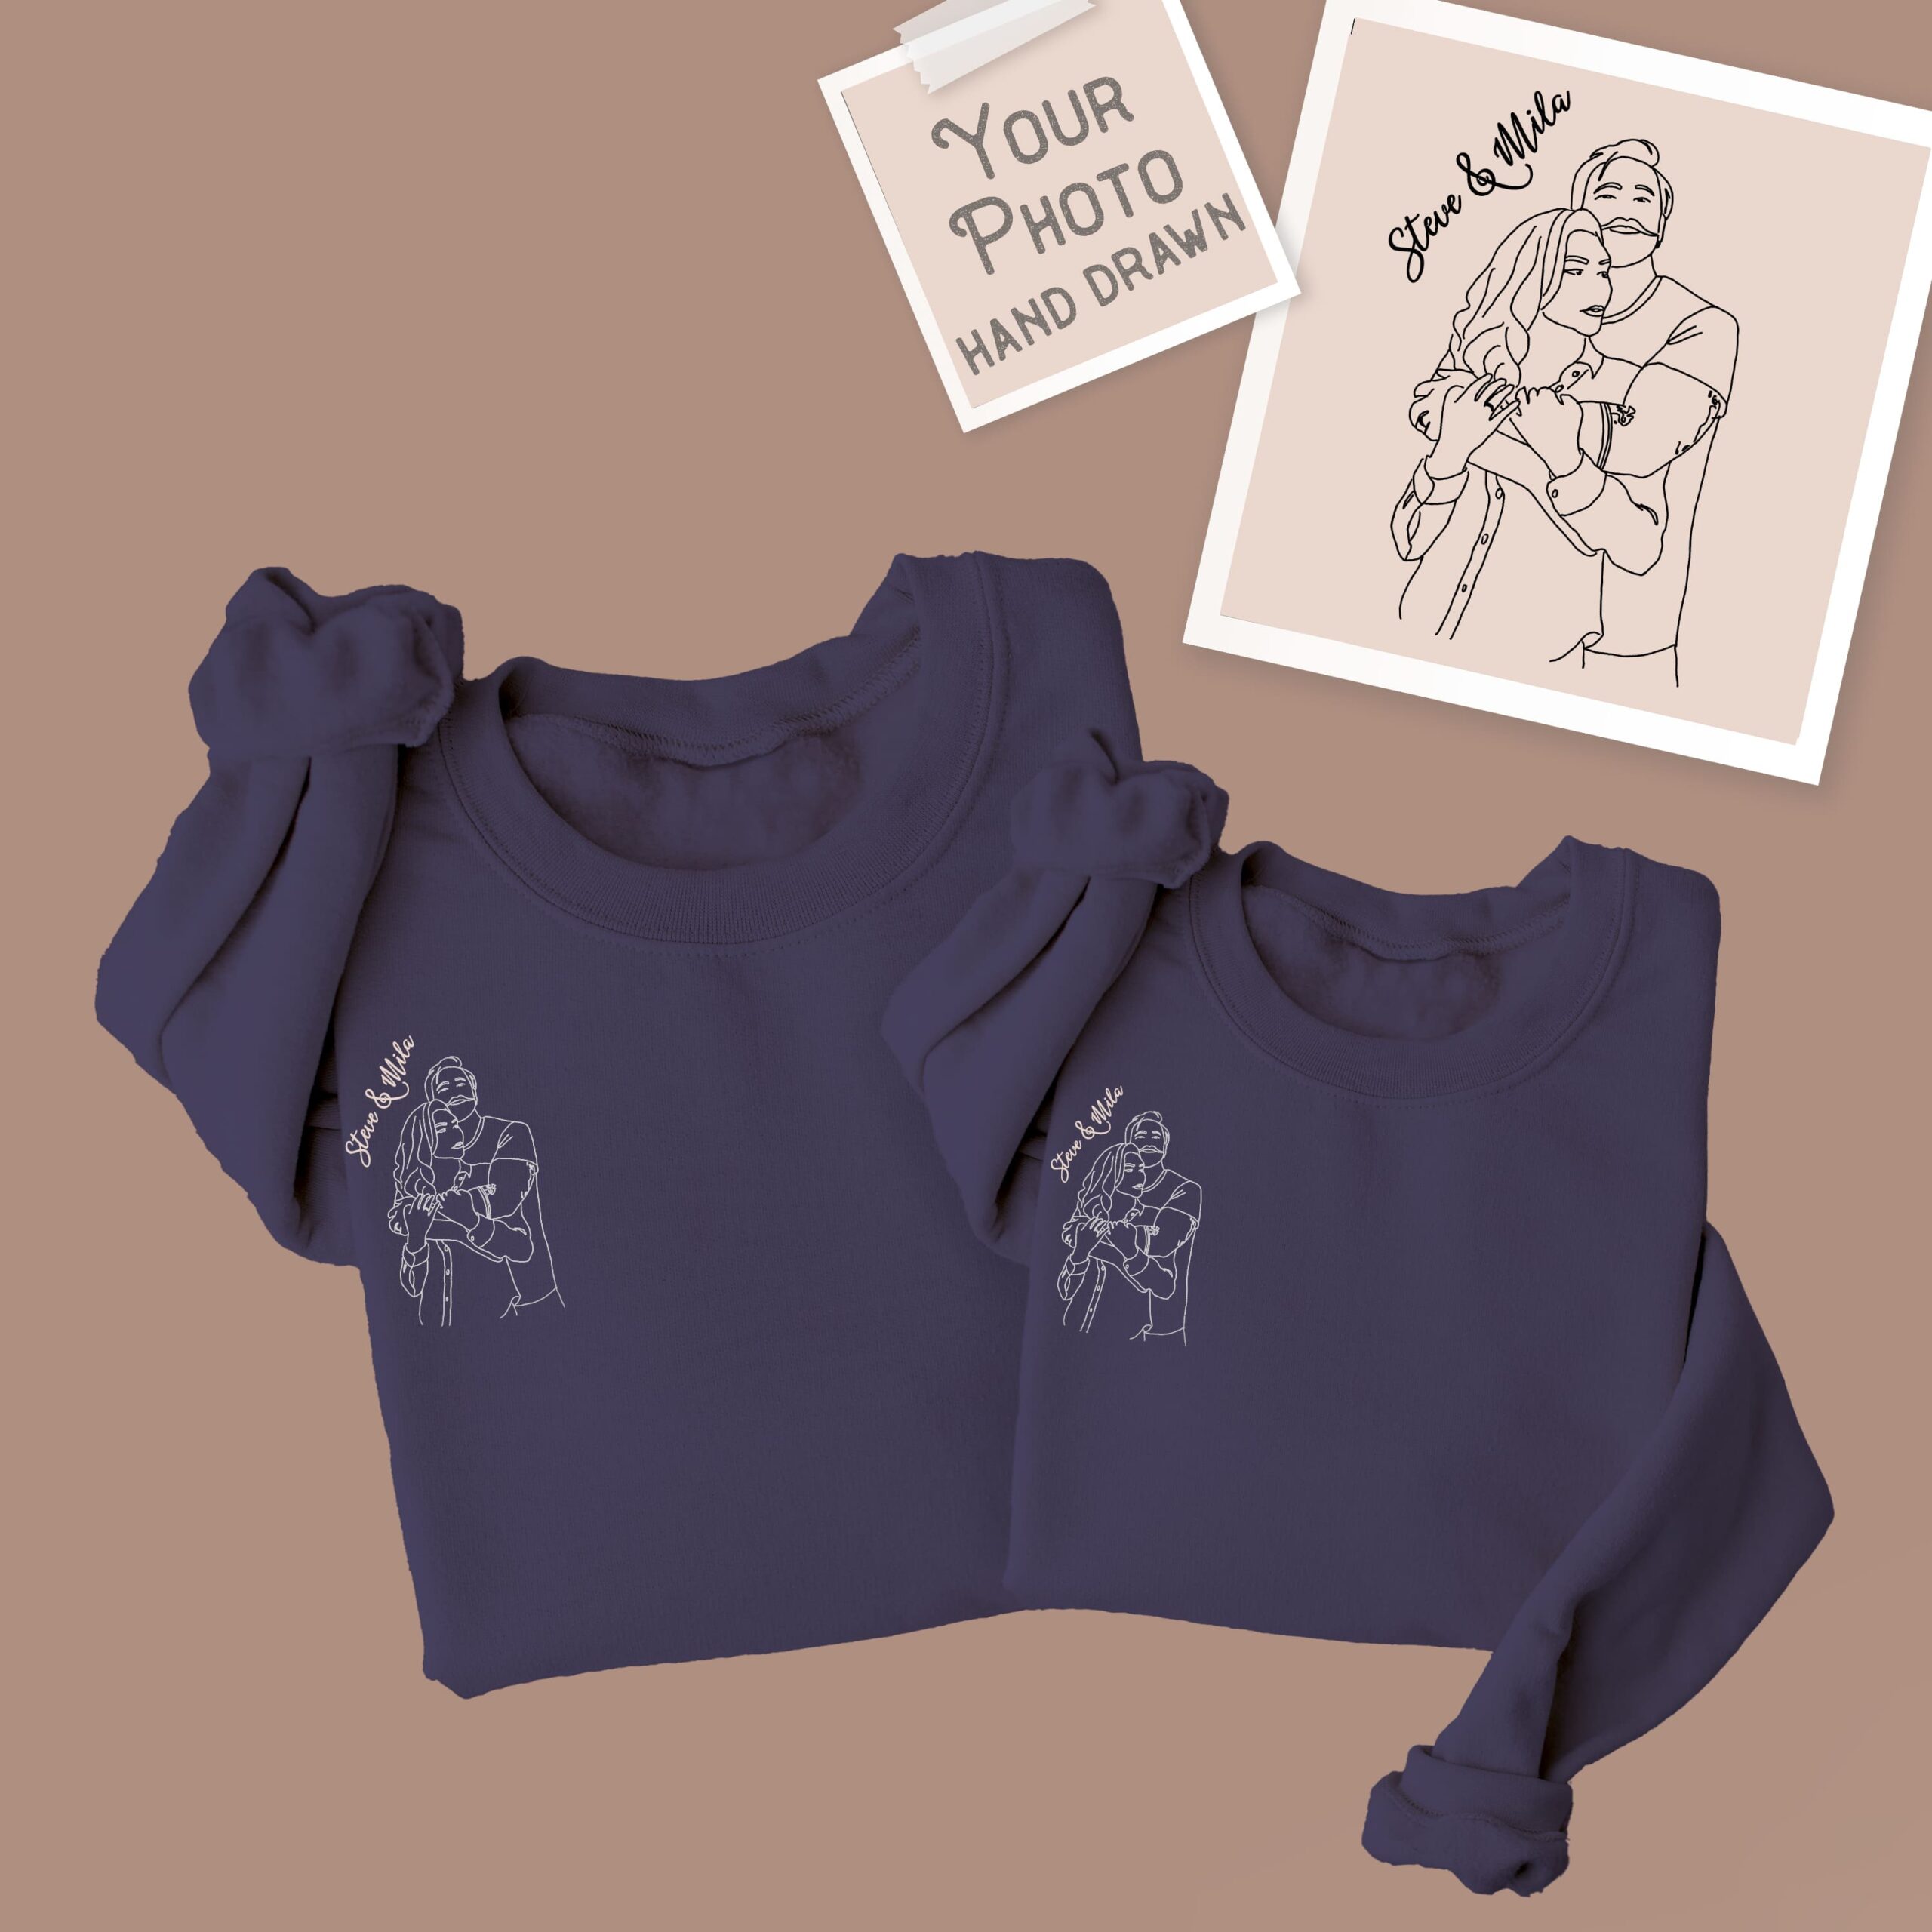 navy matching sweatshirts for couples with their name and hand drawn illustration from photo text